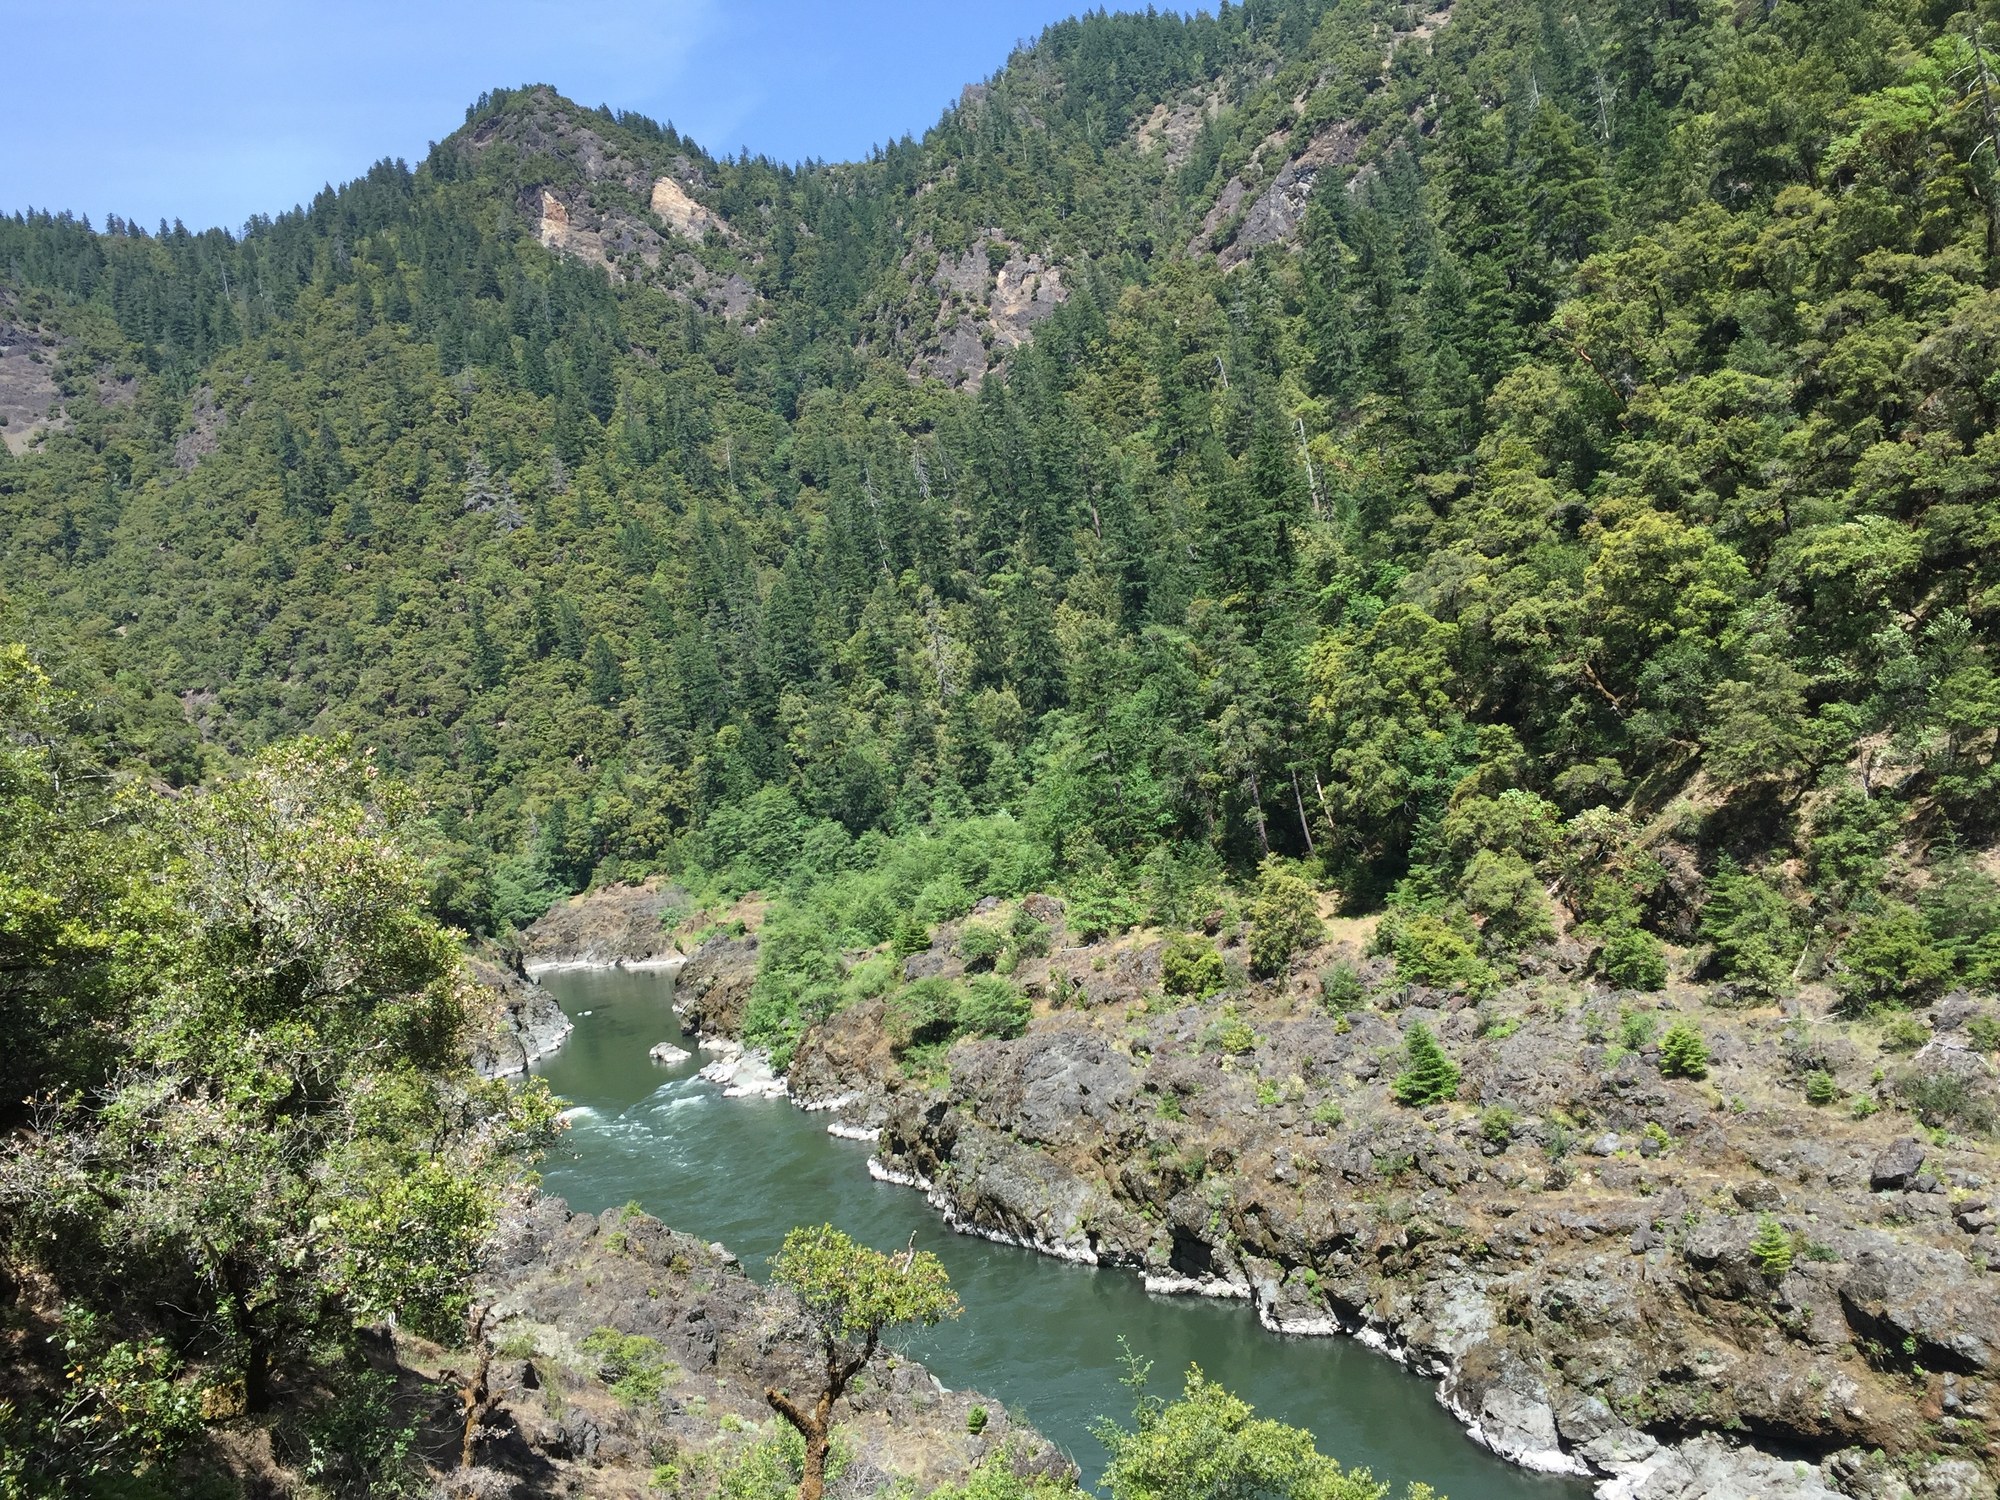 https://www.mountaineers.org/activities/routes-places/rogue-river-national-recreation-trail/@@images/image